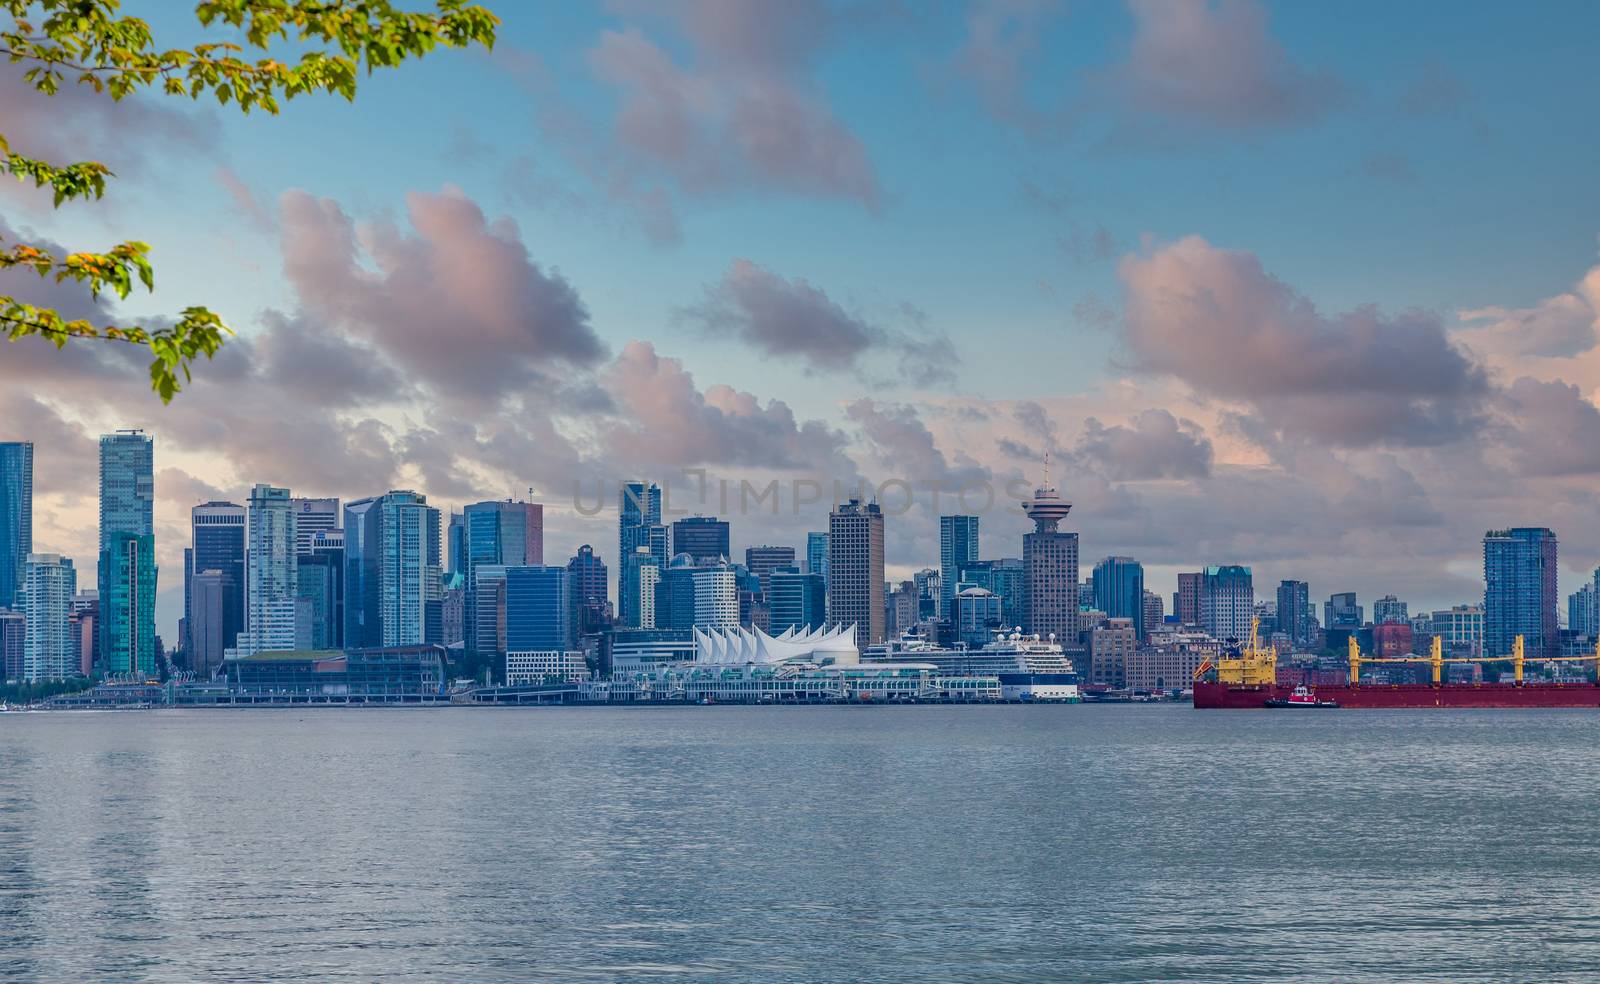 Skyline of Vancouver, British Columbia from across the harbor